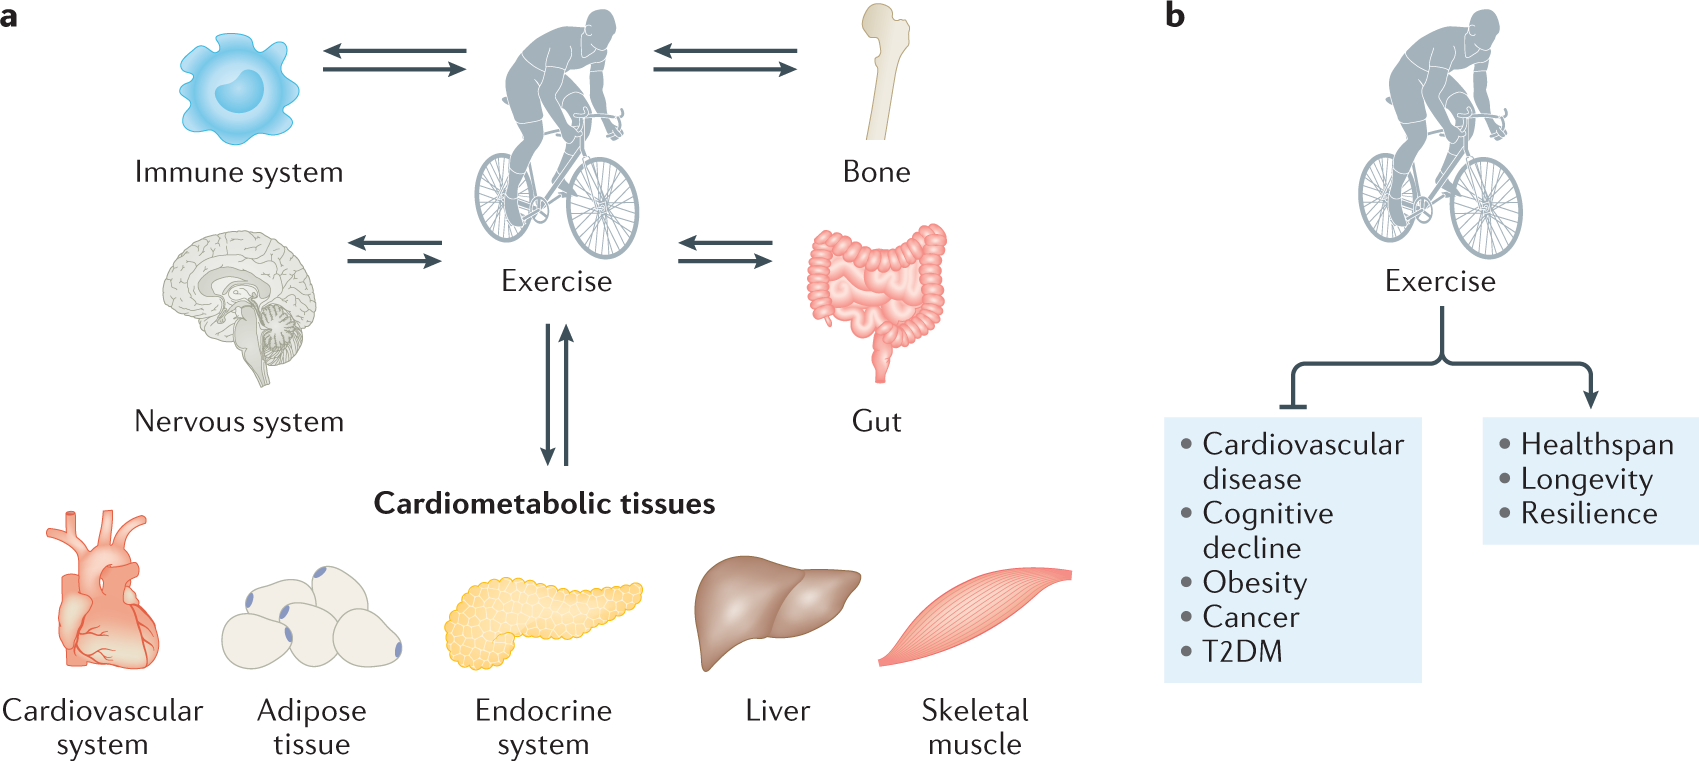 Exerkines in health, resilience and disease